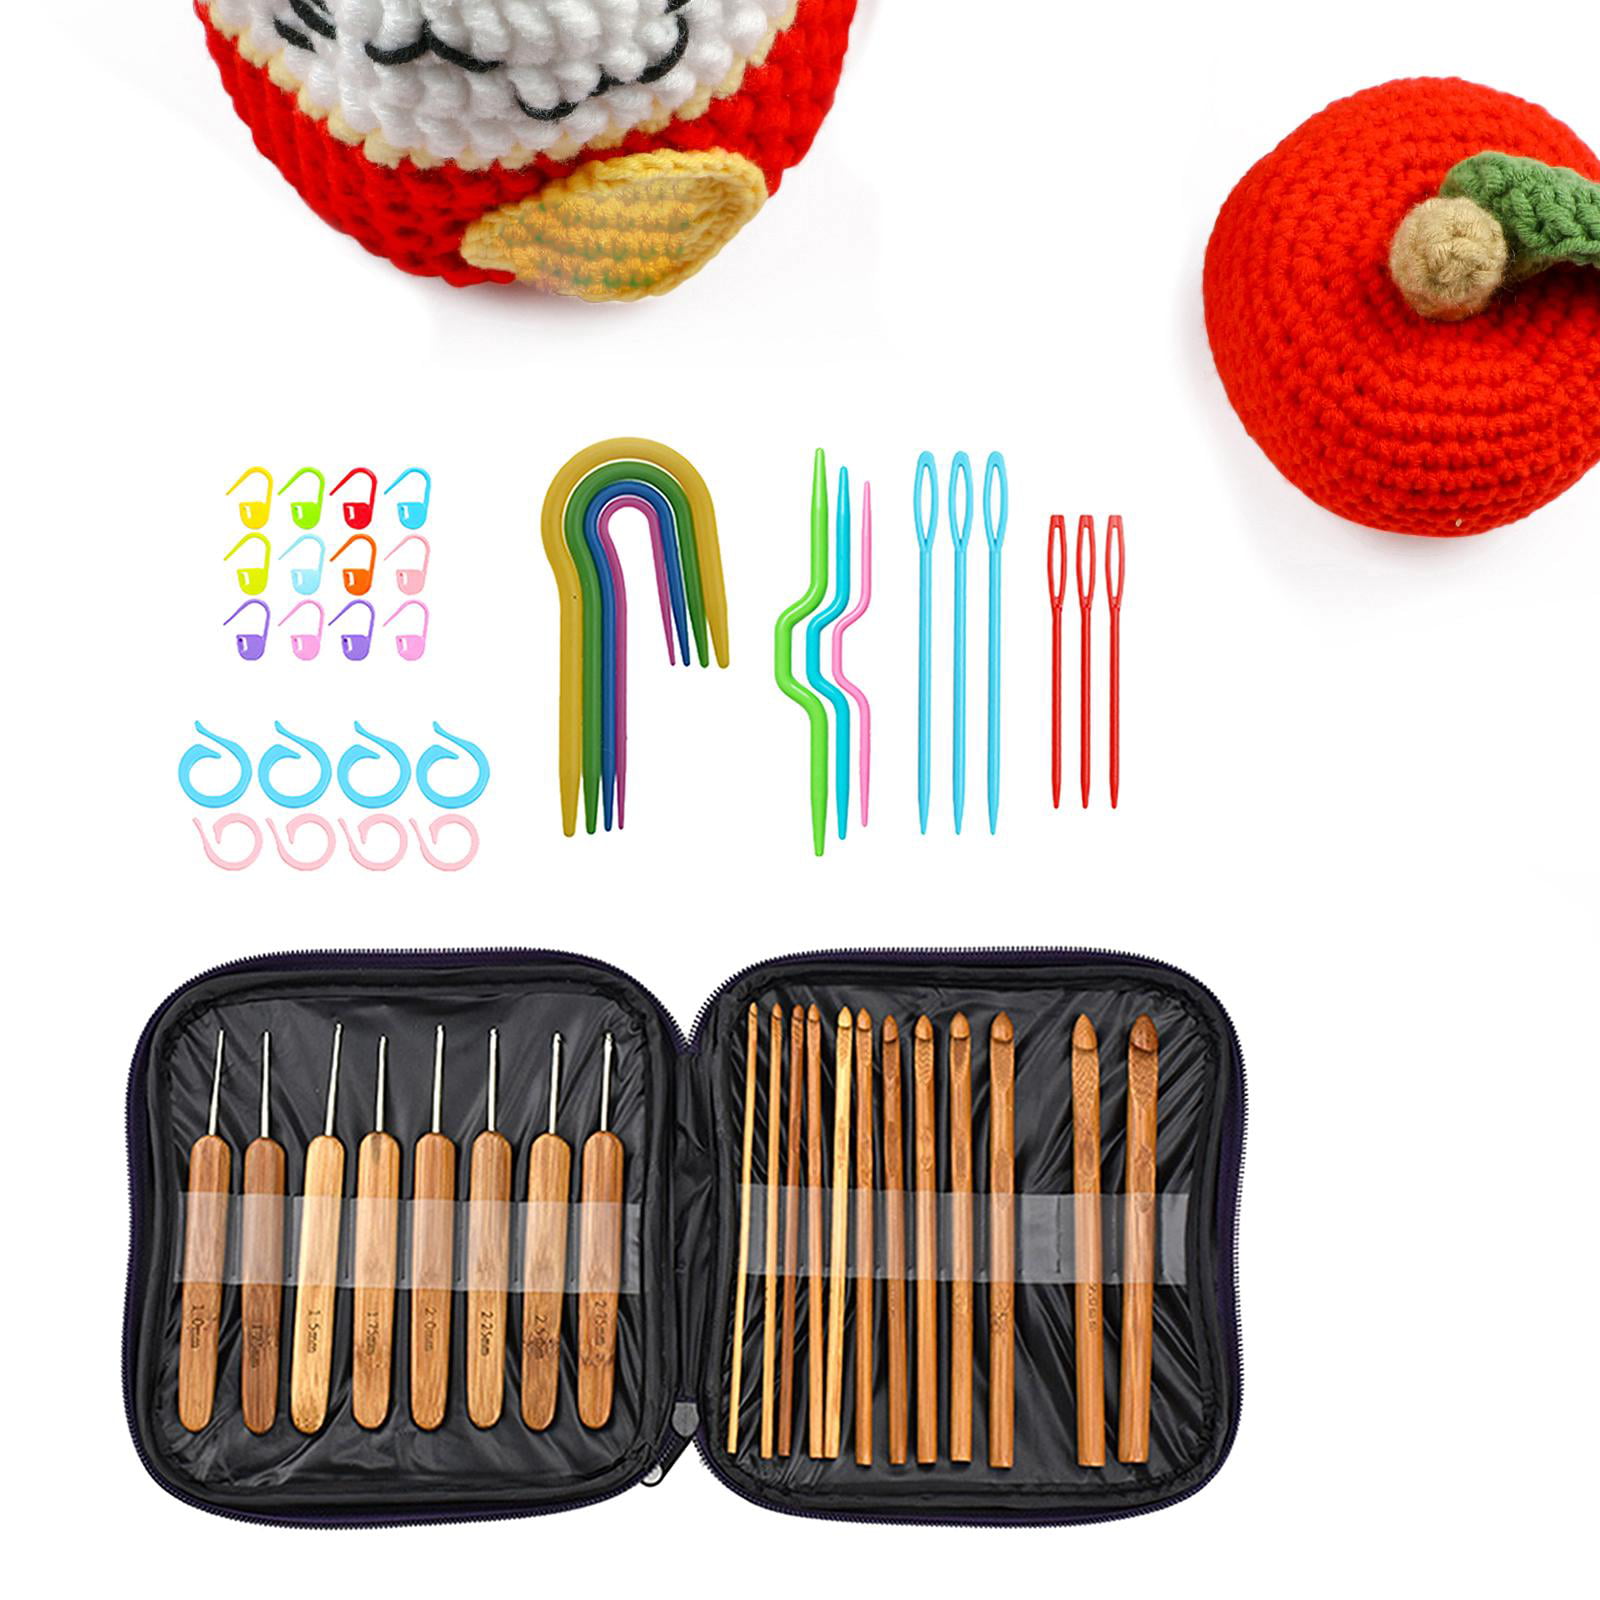 Incraftables Crochet Kit for Beginners & Pro. Crocheting Set with